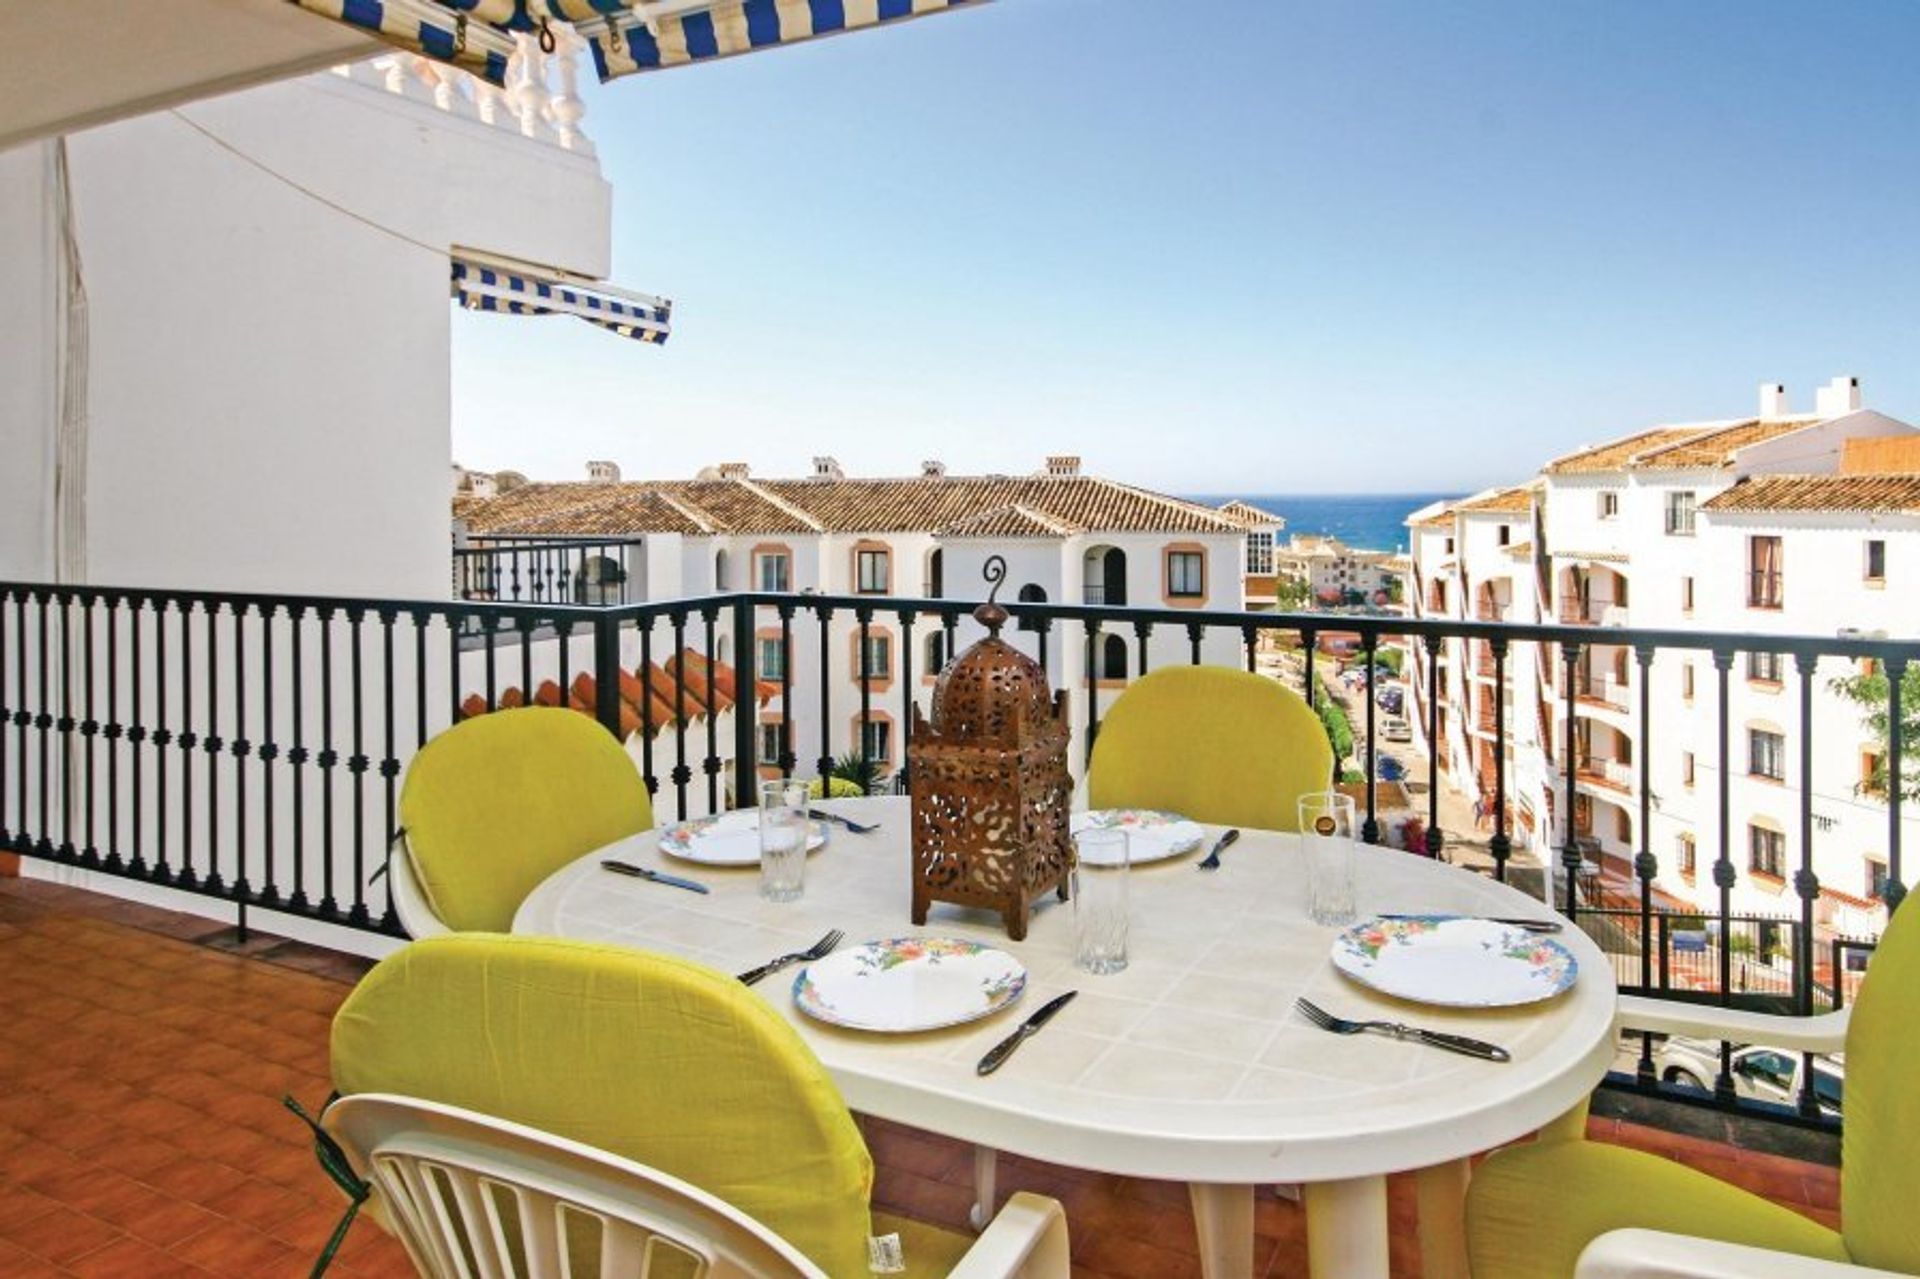 Enjoy views of the sparkling Mediterranean with our apartments near the beach